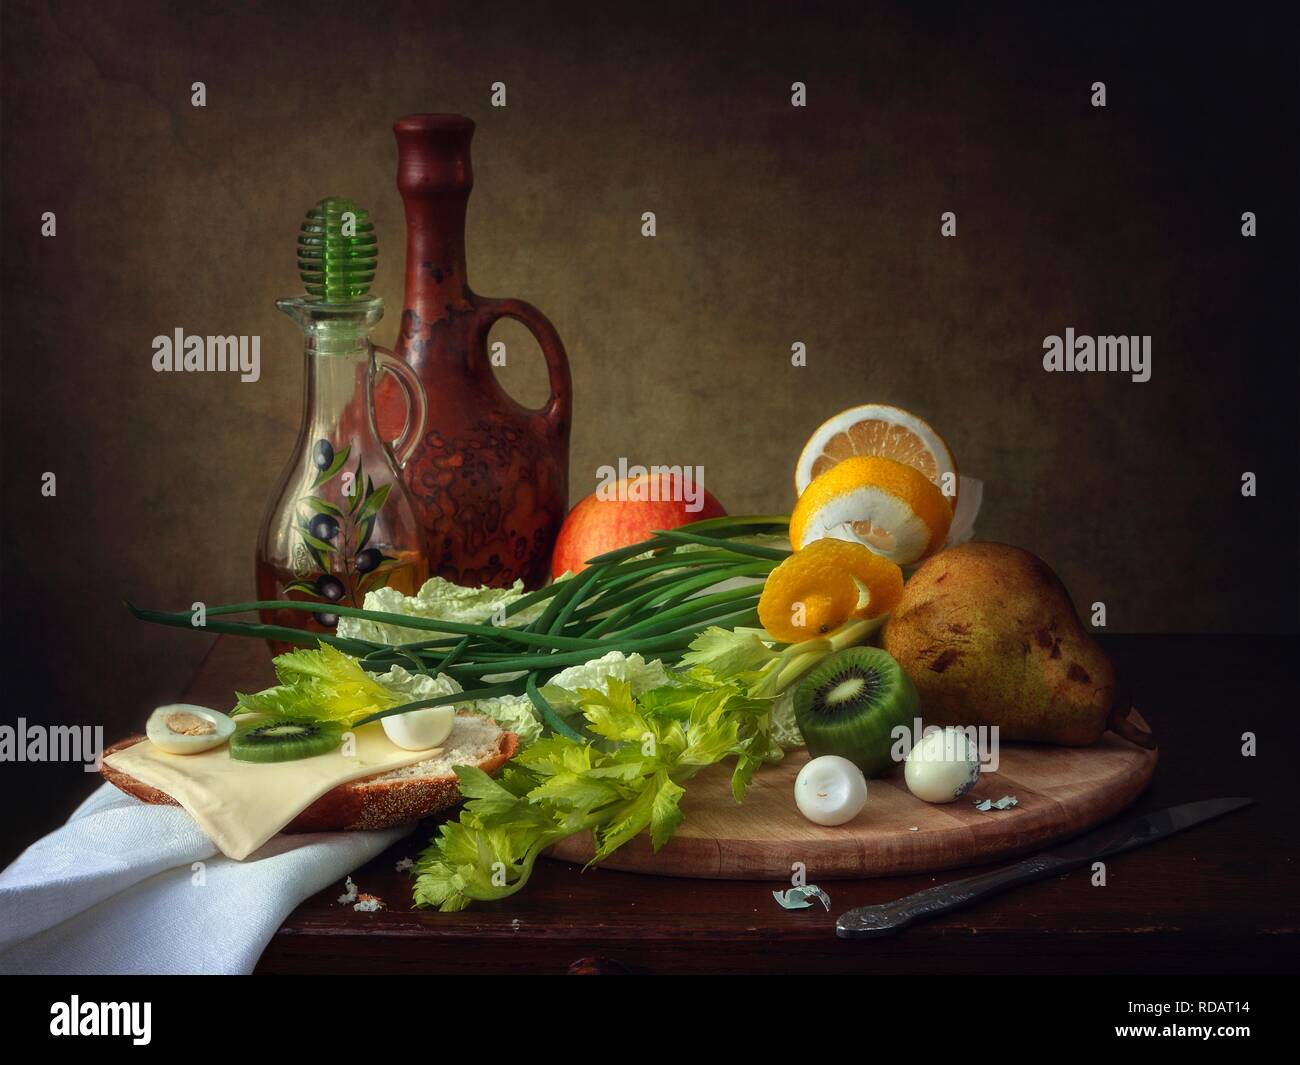 Still life with vegetarian food Stock Photo